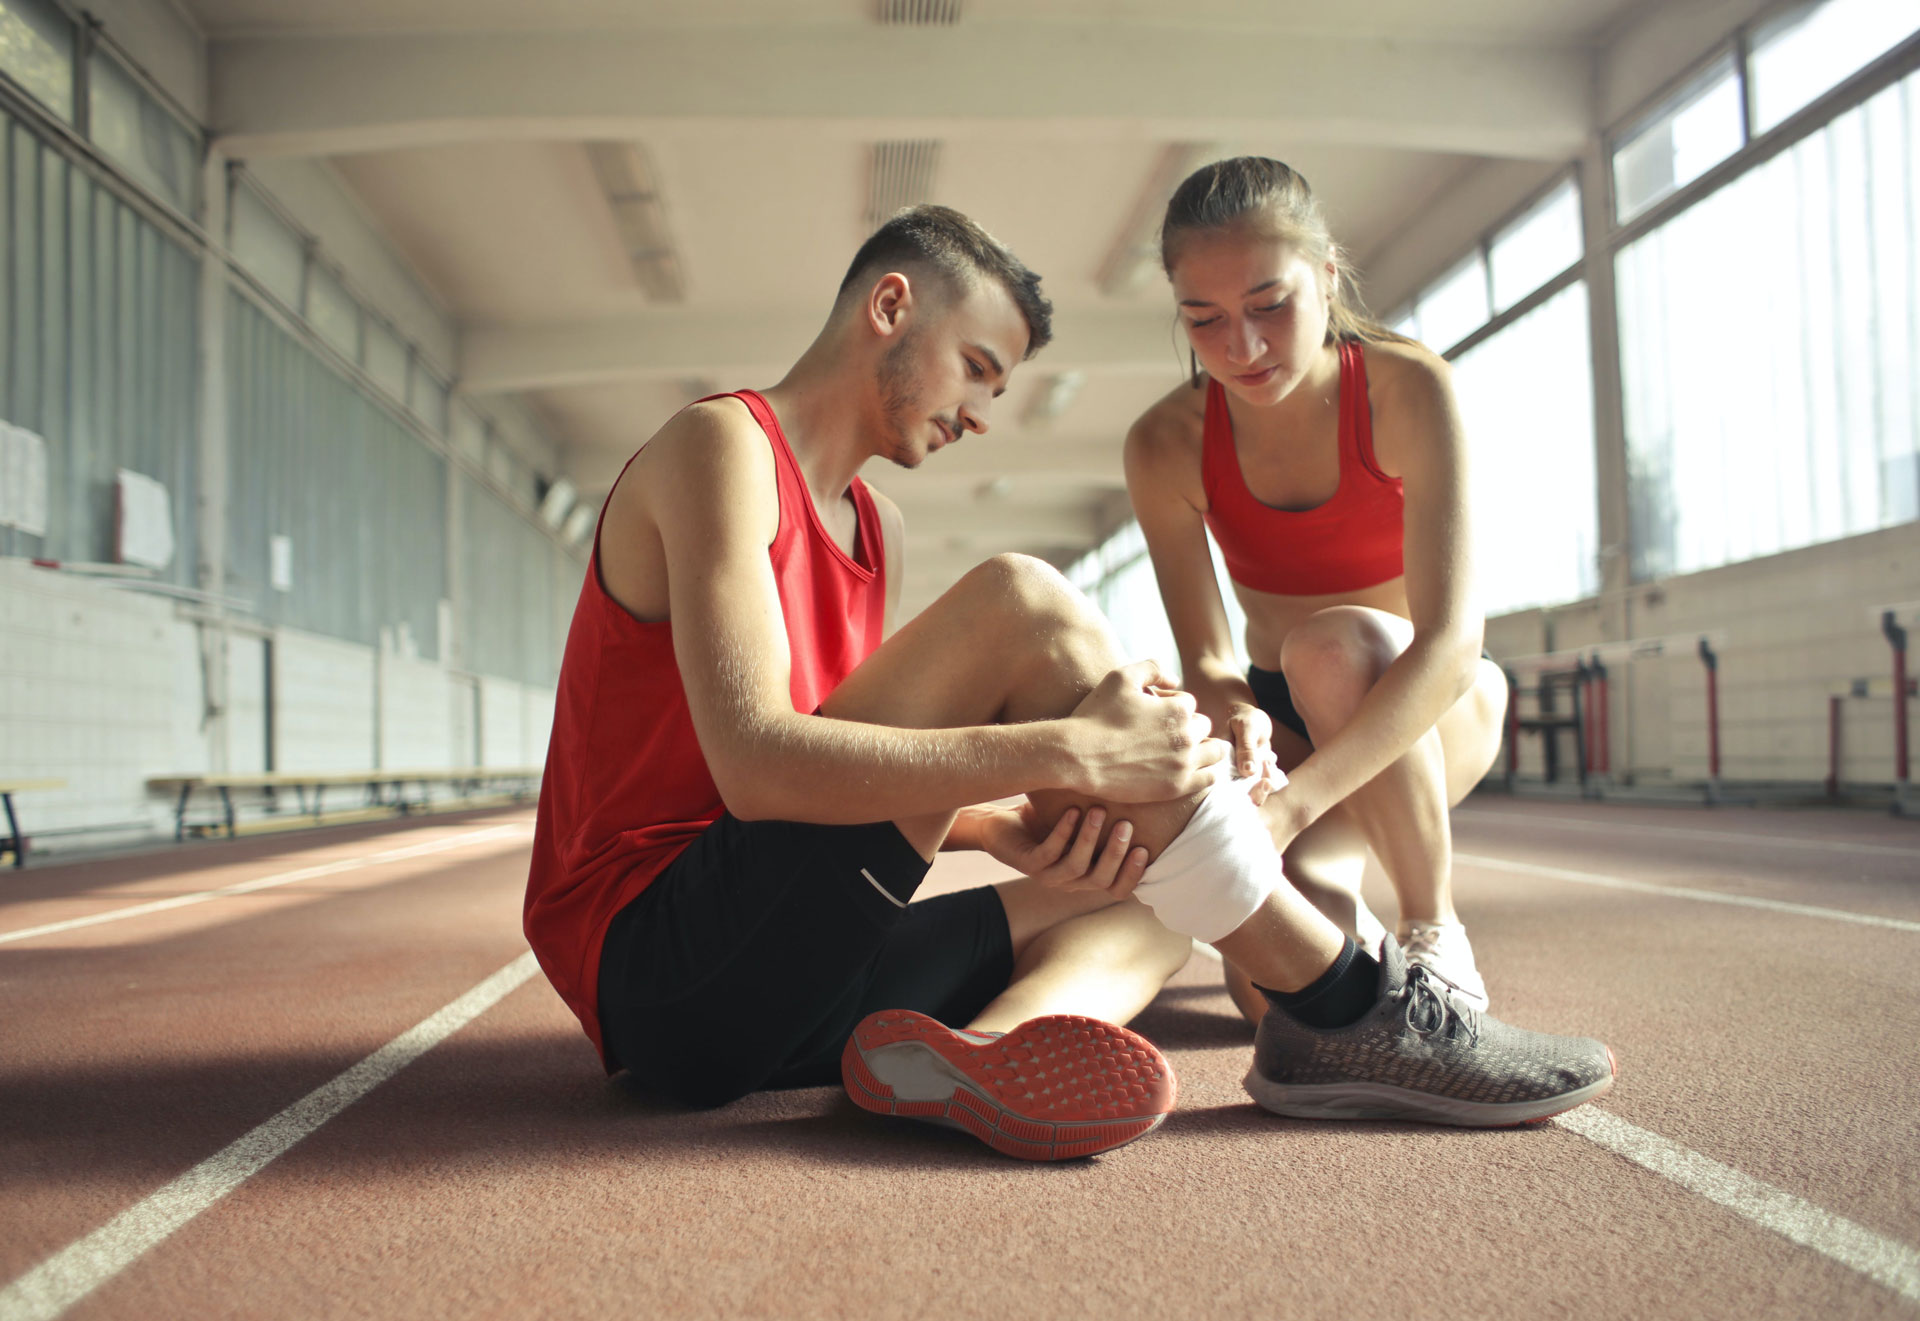 Common Gym & Workout Injuries and How to Avoid Them